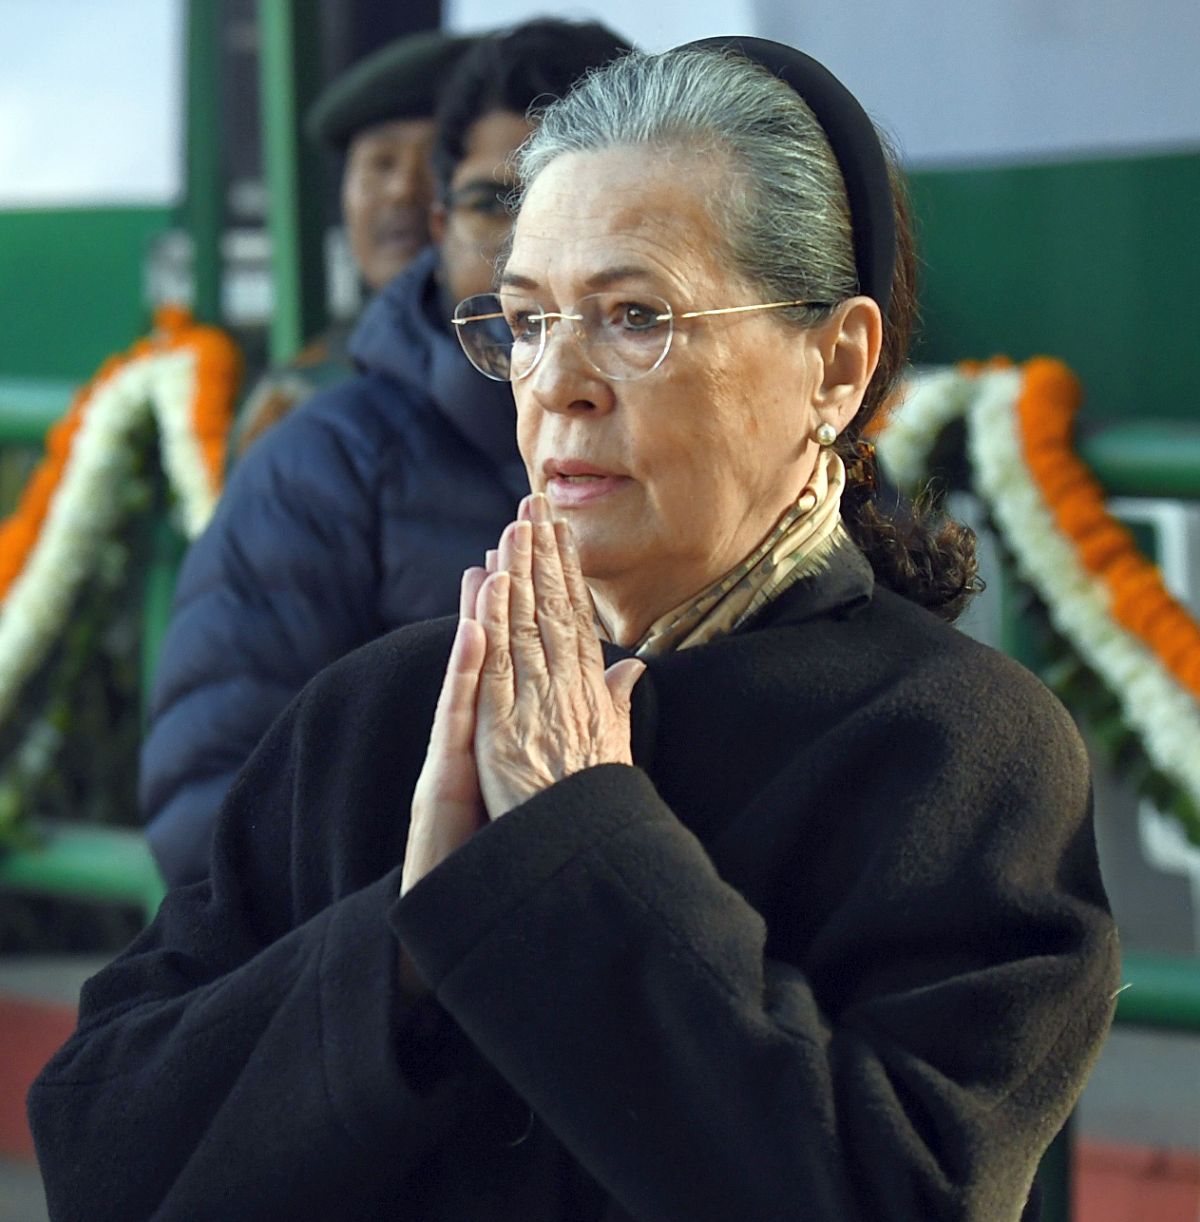 Sonia Gandhi admitted to hospital with viral infection - Rediff.com